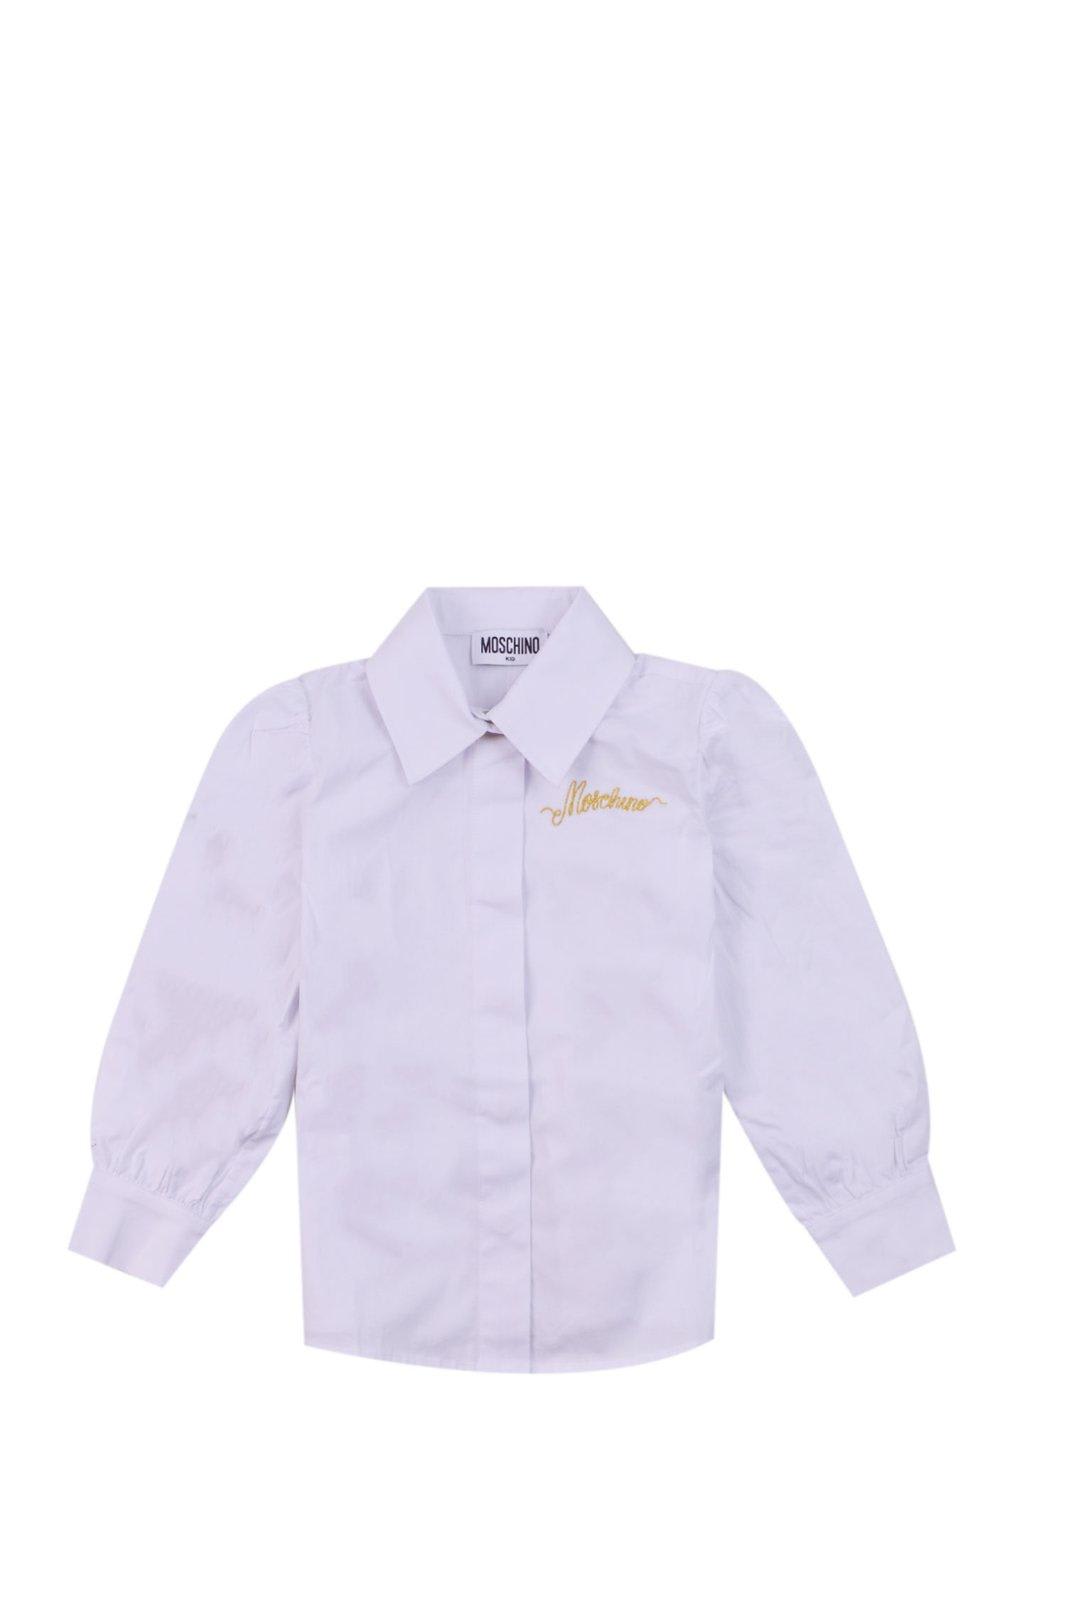 Moschino Kids' Long-sleeved Logo-embroidered Shirt In Bianco Ottico